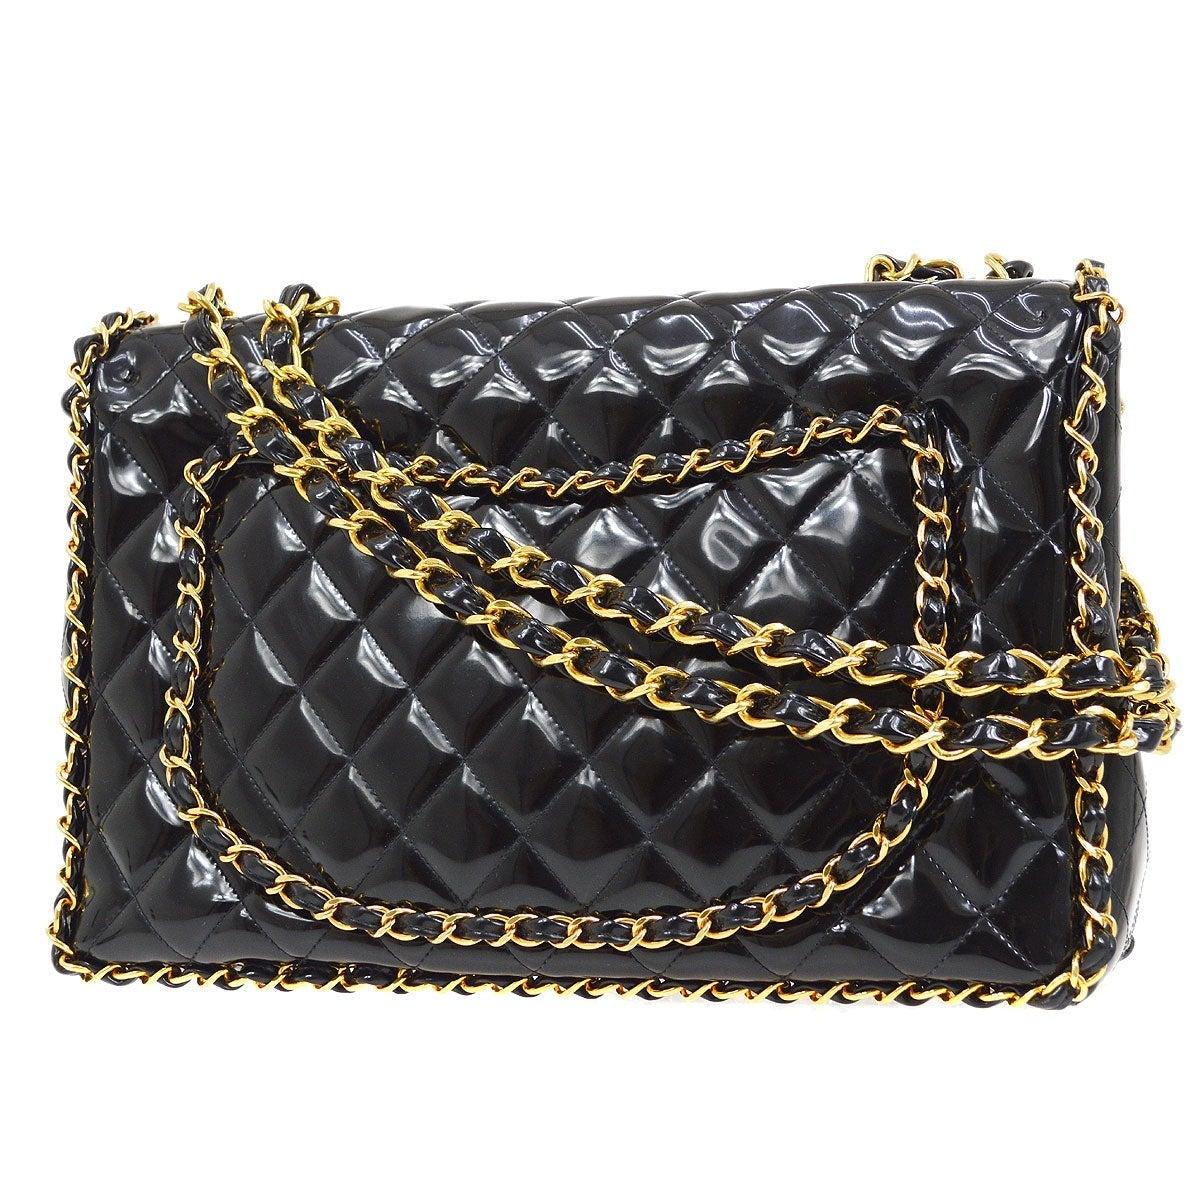 CHANEL Black Patent Leather Wrap Chain Gold Maxi Evening Shoulder Flap Bag In Good Condition For Sale In Chicago, IL